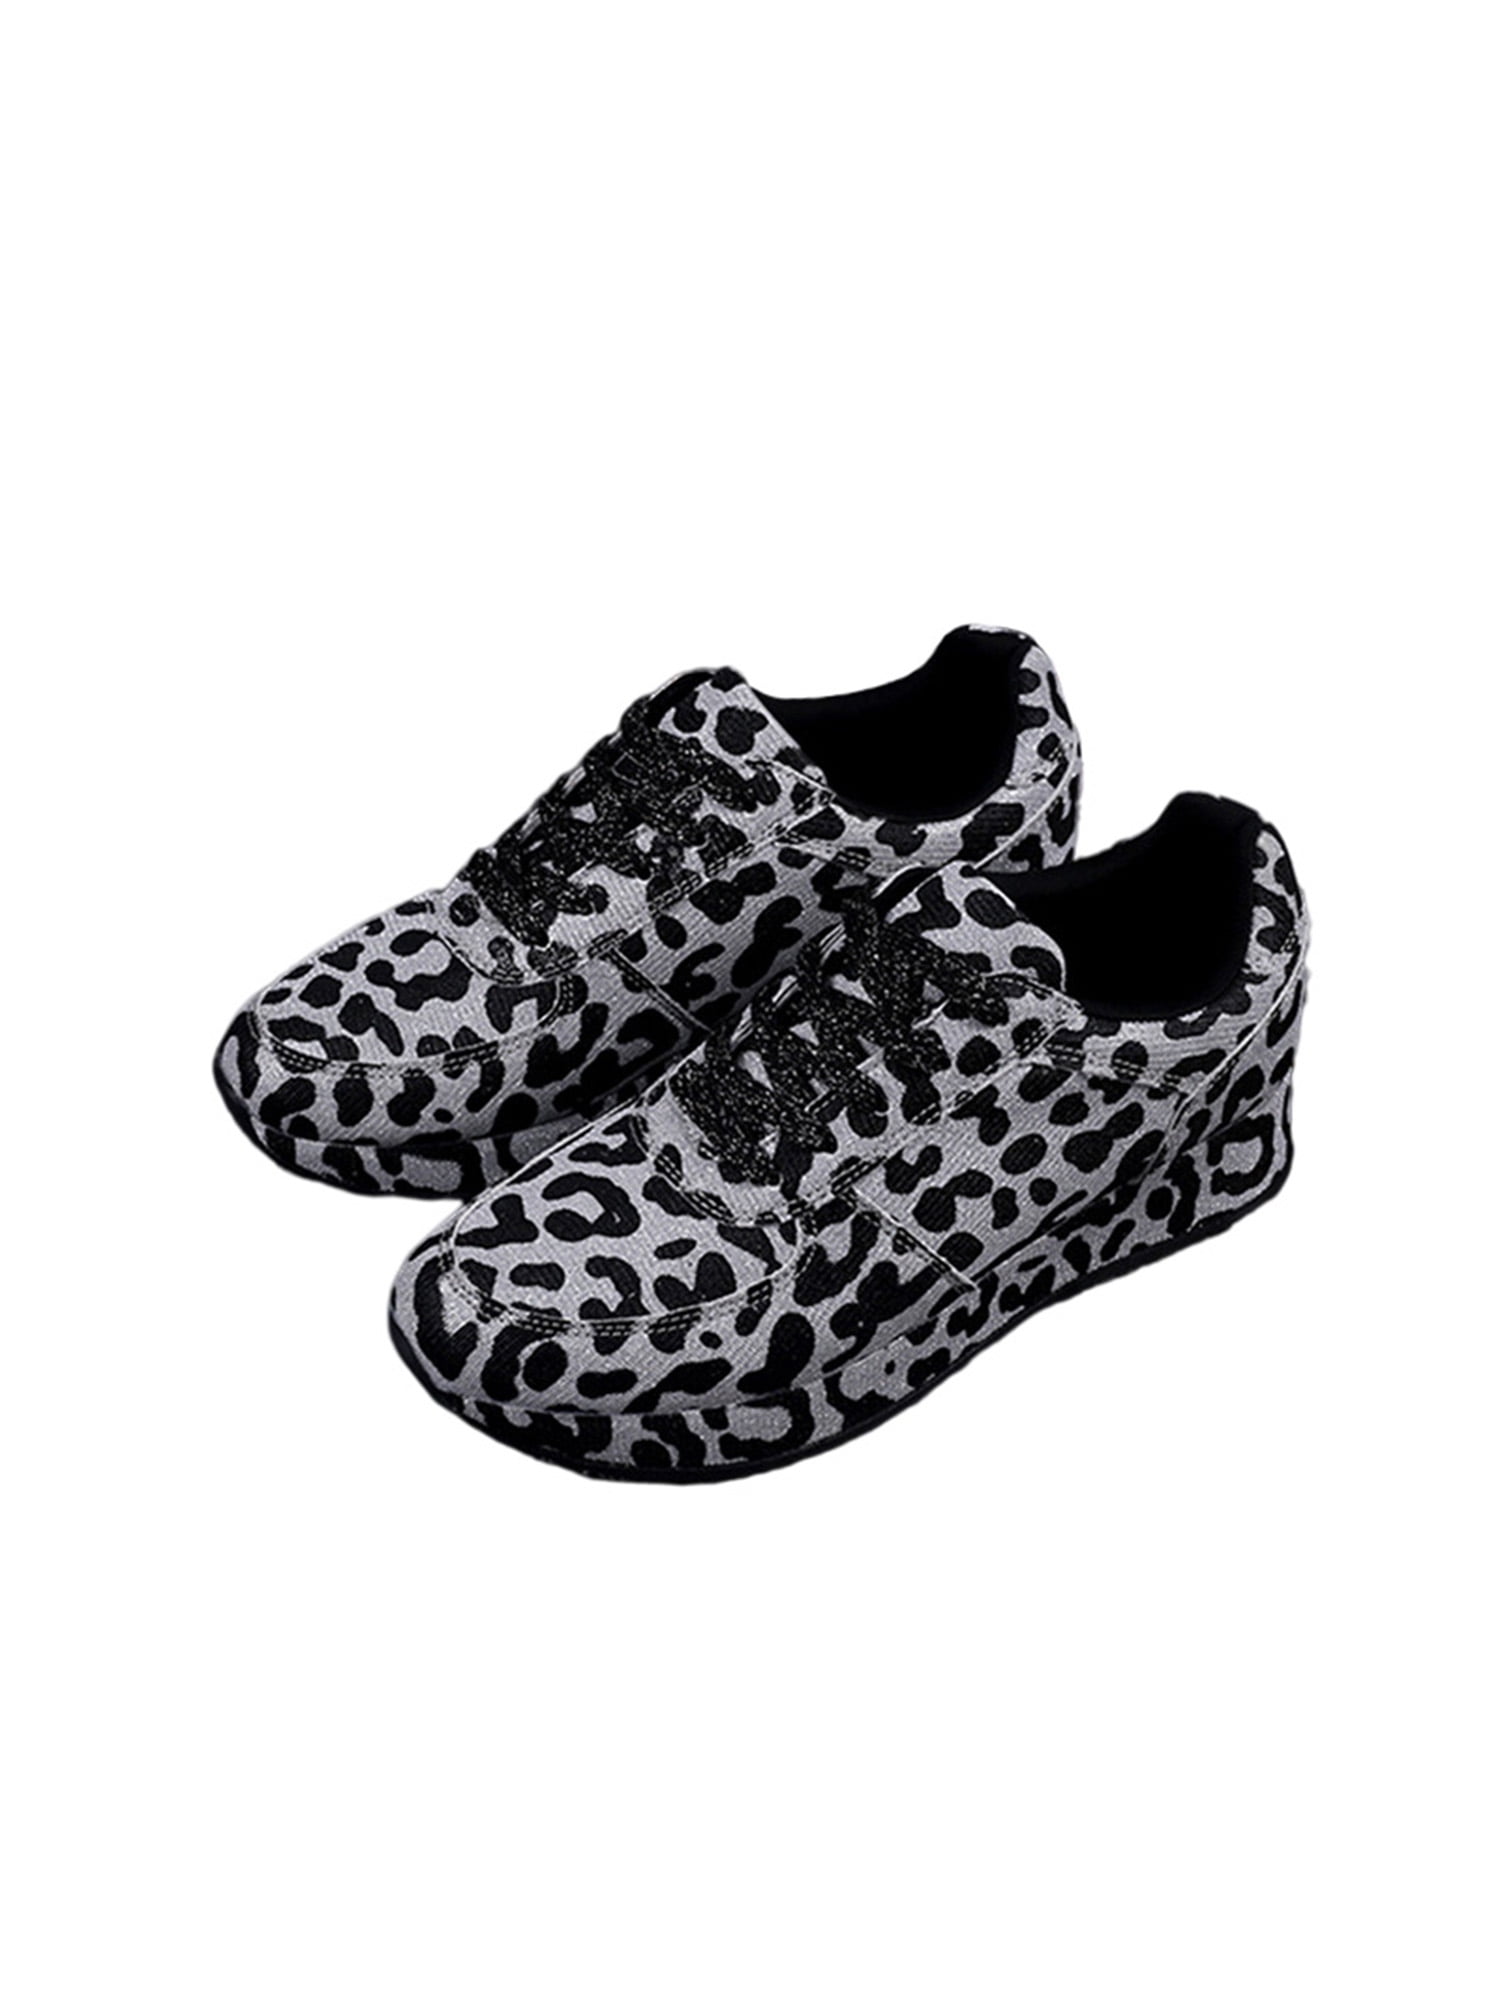 Onygo Platform Trainers leopard pattern casual look Shoes Sneakers 